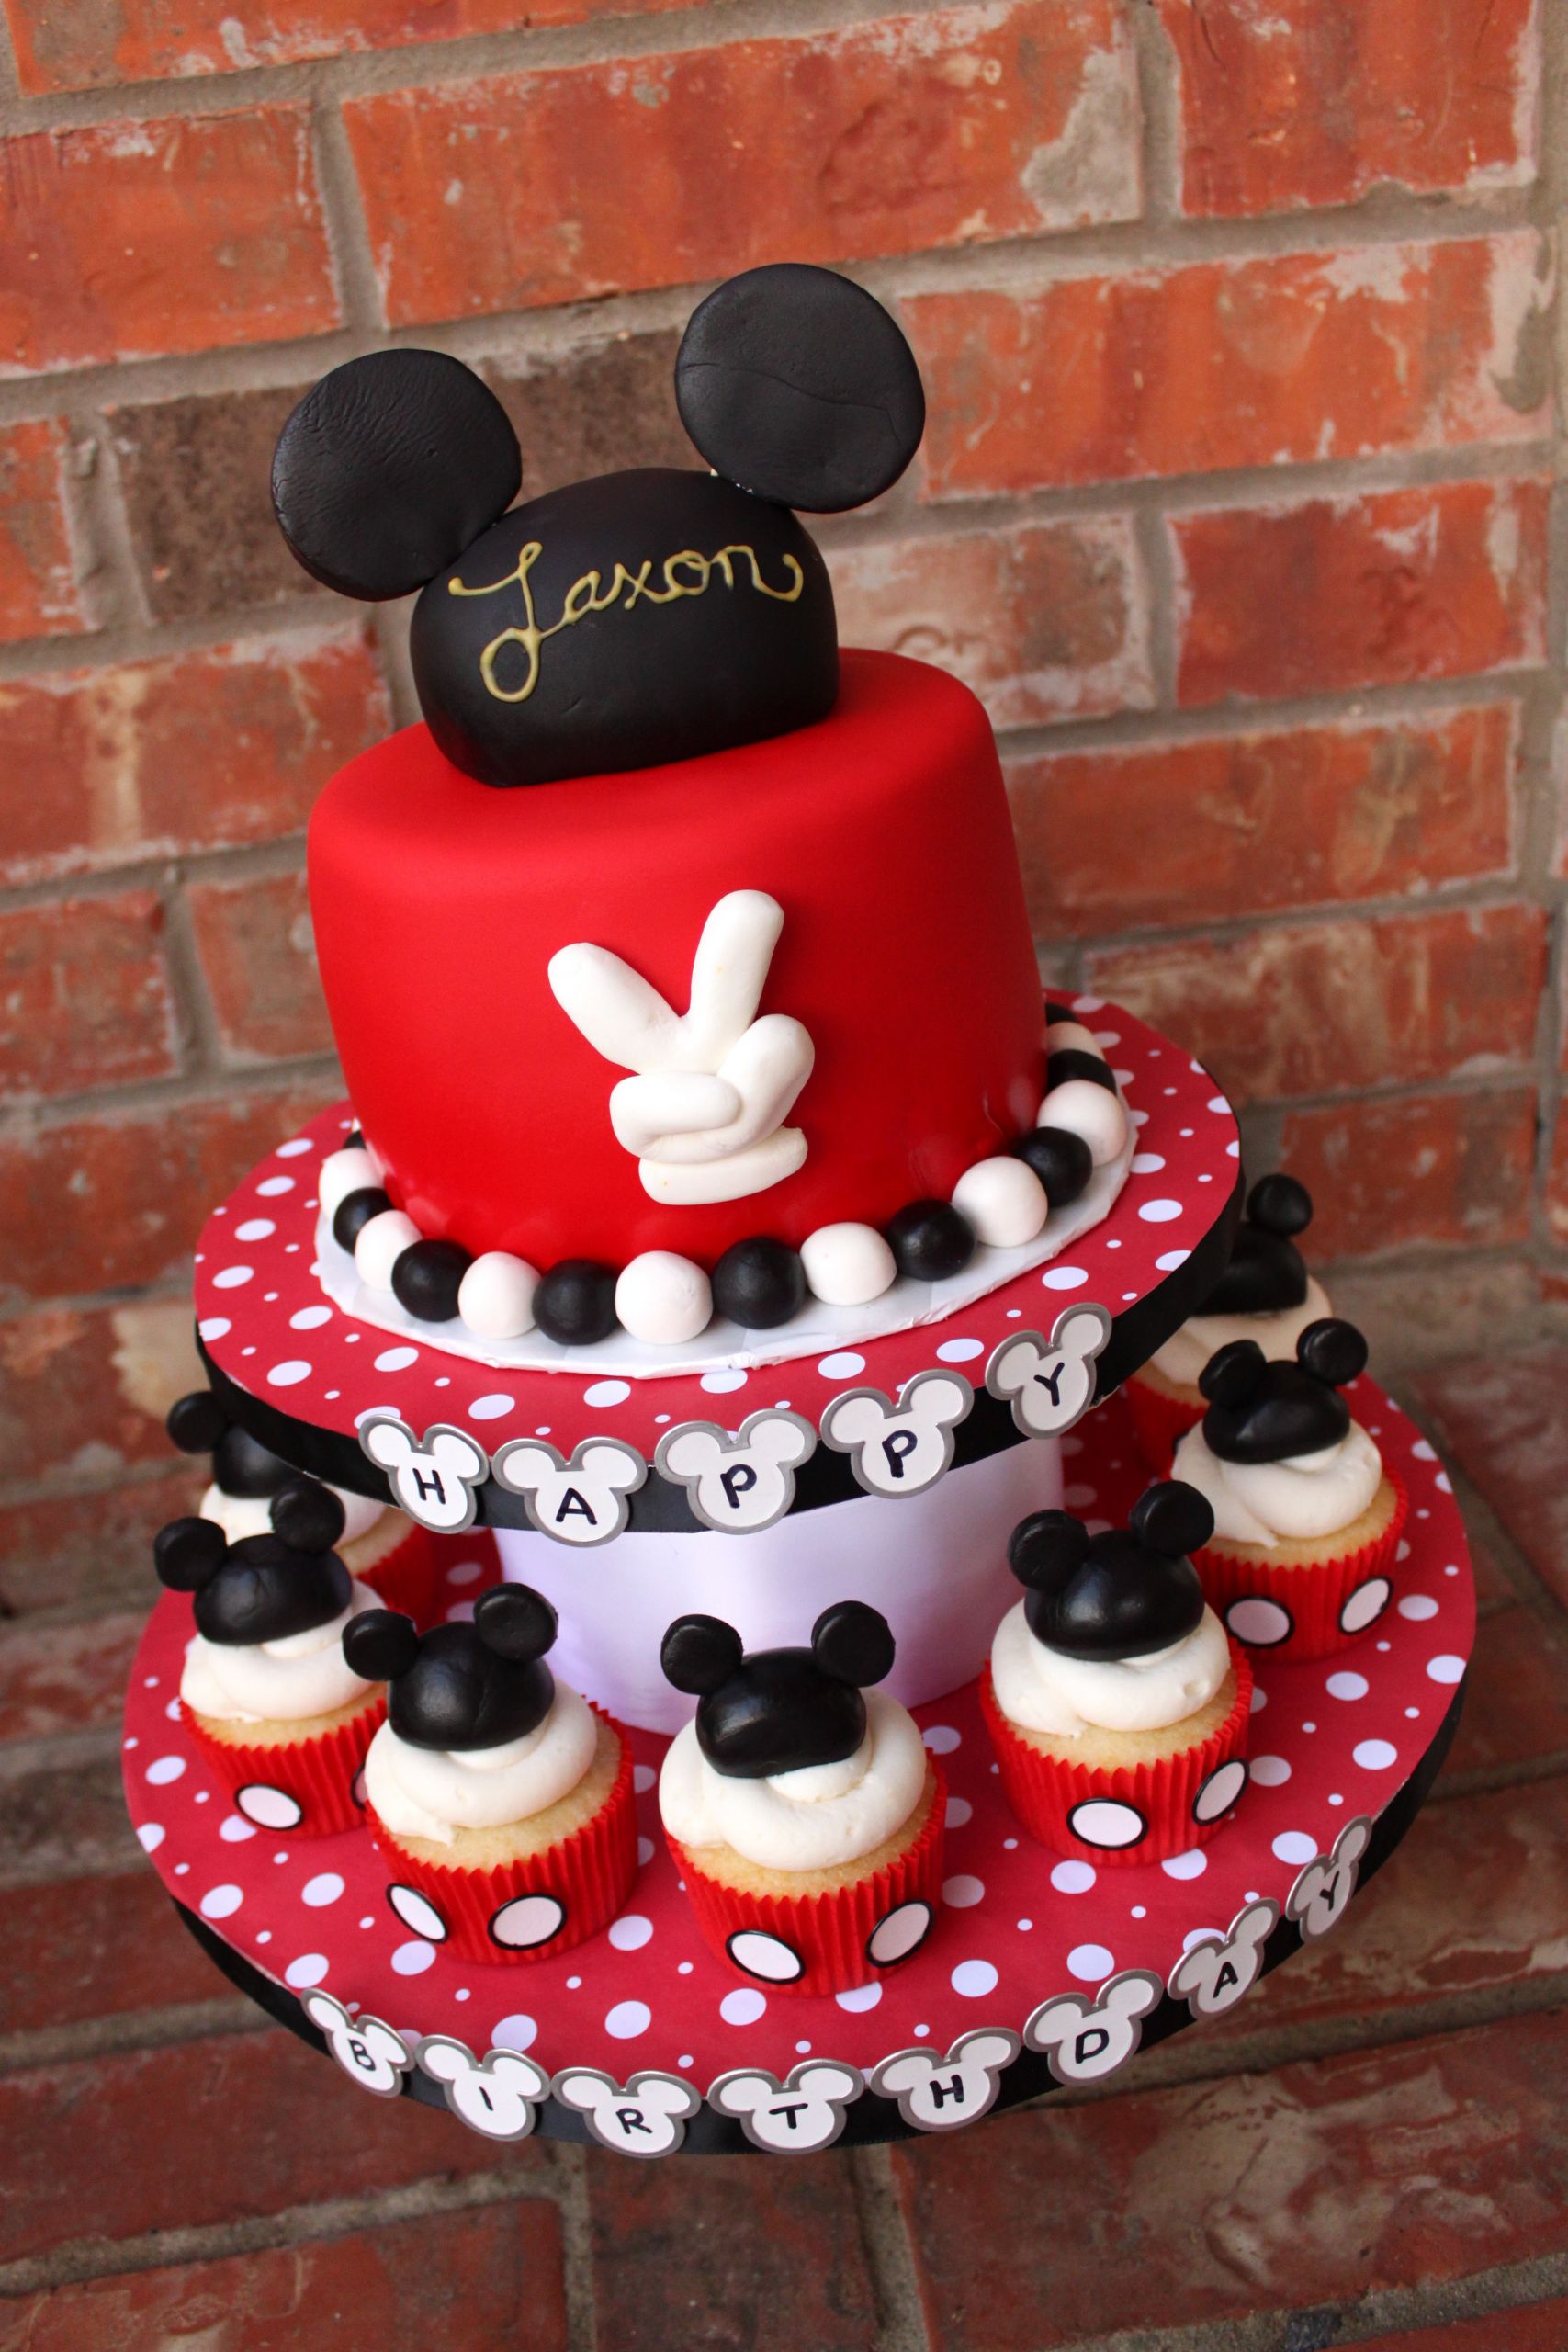 Mickey Mouse Birthday Cake Decorations
 Mickey Mouse Cake – Decoration Ideas